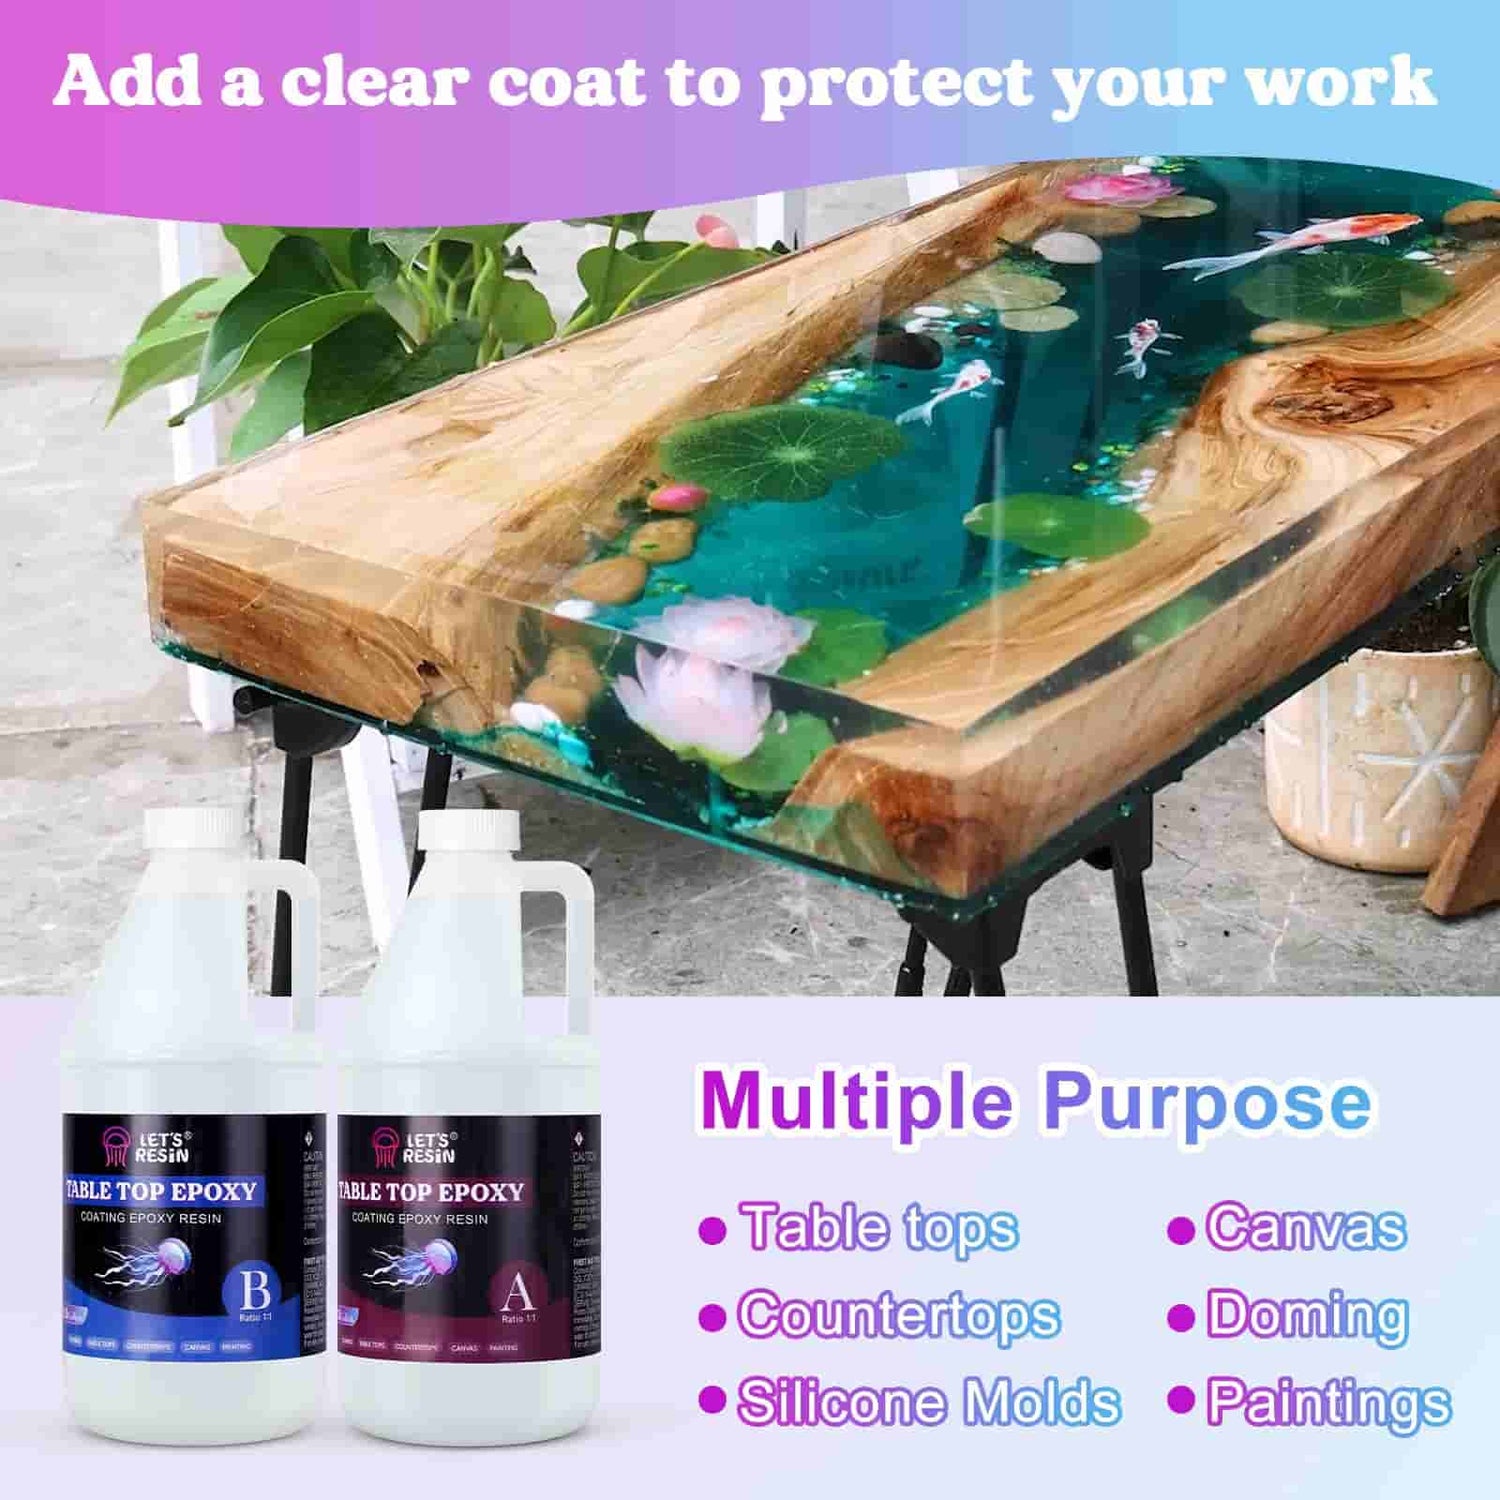 East Coast Resin Table Top Epoxy Resin 2 Gallon Kit for Crystal Clear,  Super Gloss Coating, Table Tops, Art Resin, Wood, Jewellery, Counter Tops,  Casting Molds, Bar Tops, DIY. 